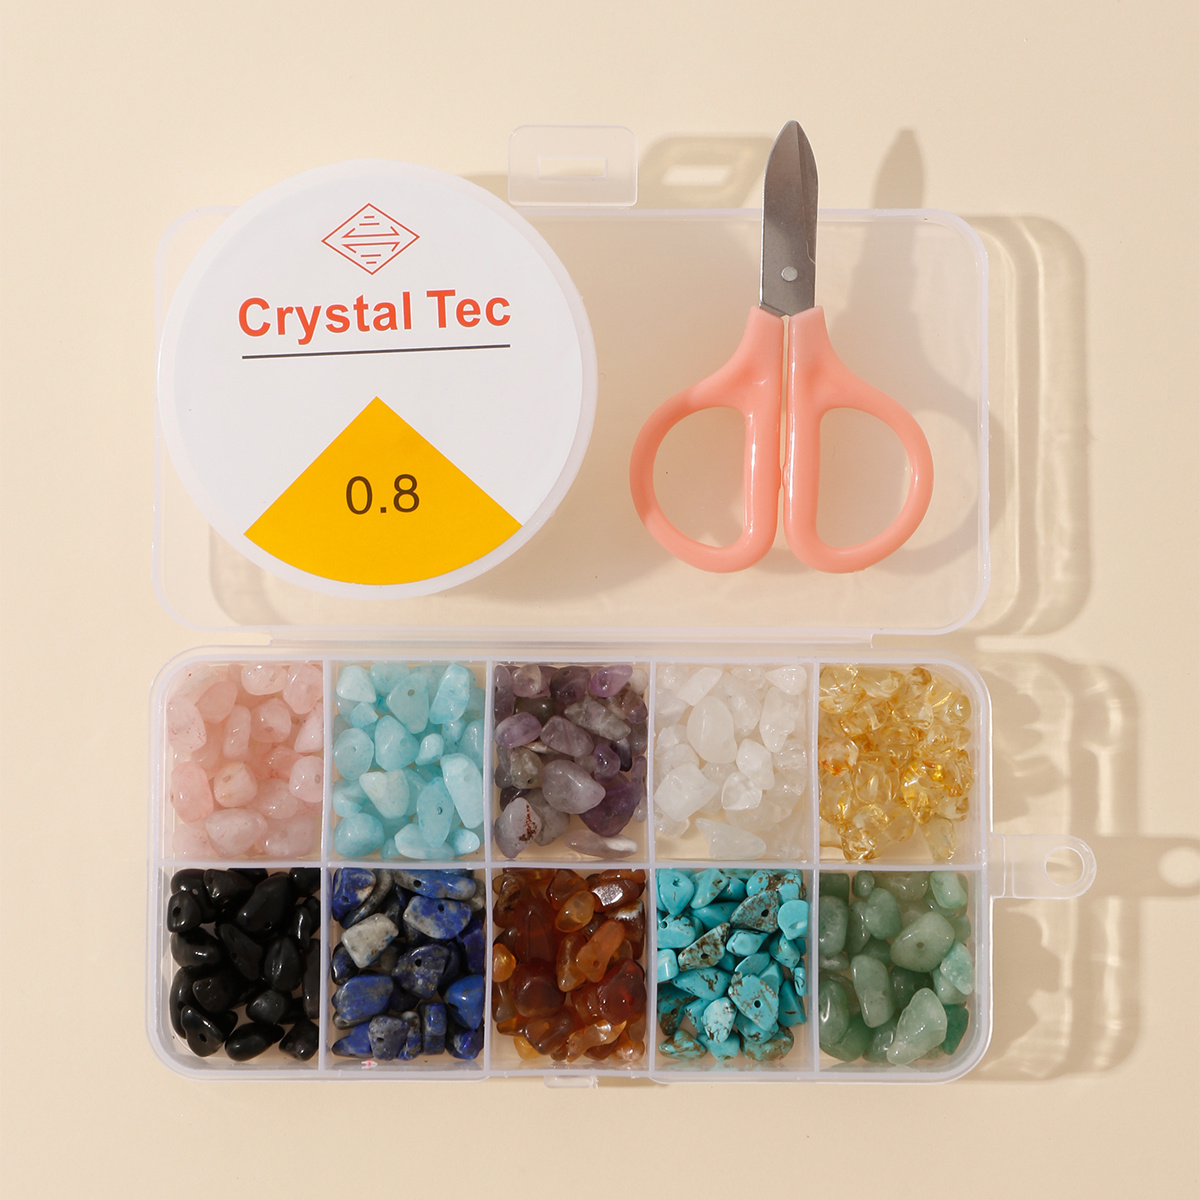 Diy Crystal Jewelry Making Kit With 15 Grids Crystal Gemstone Beads Earring  Hooks Elastic Wire Pliers Accessories Bracelet Necklace Handcraft Tool